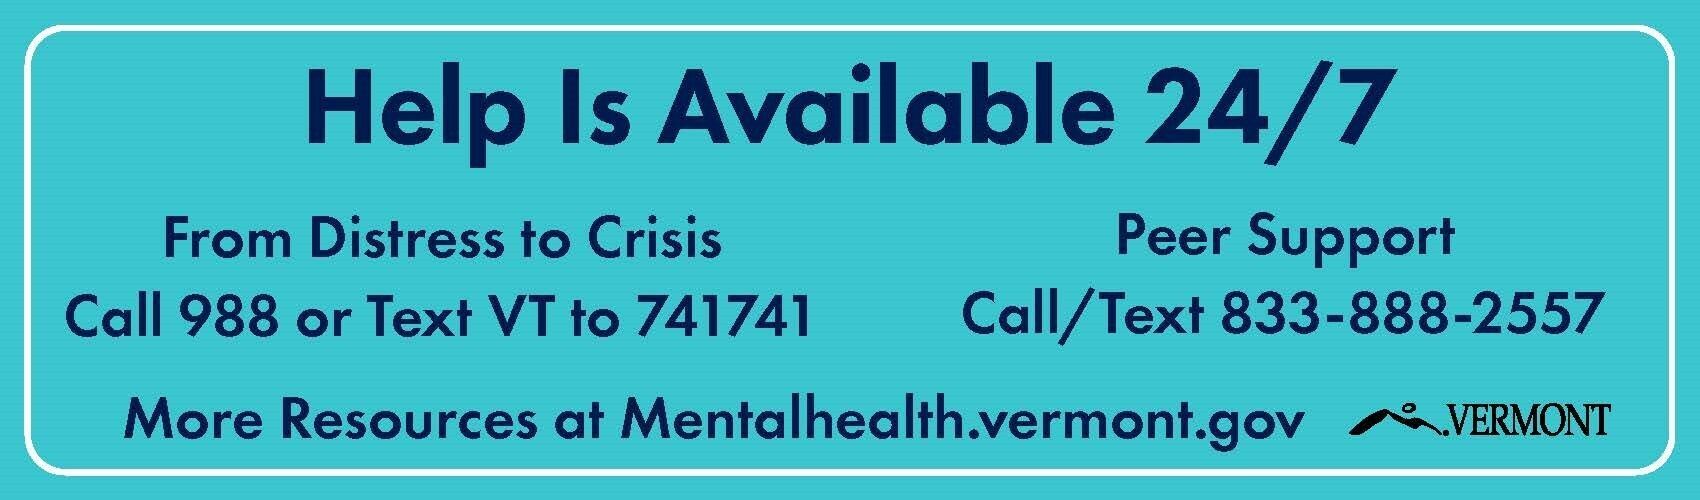 Vermont adopts 9-8-8 phone number for mental health support and crisis --  New Line Available Starting July 16